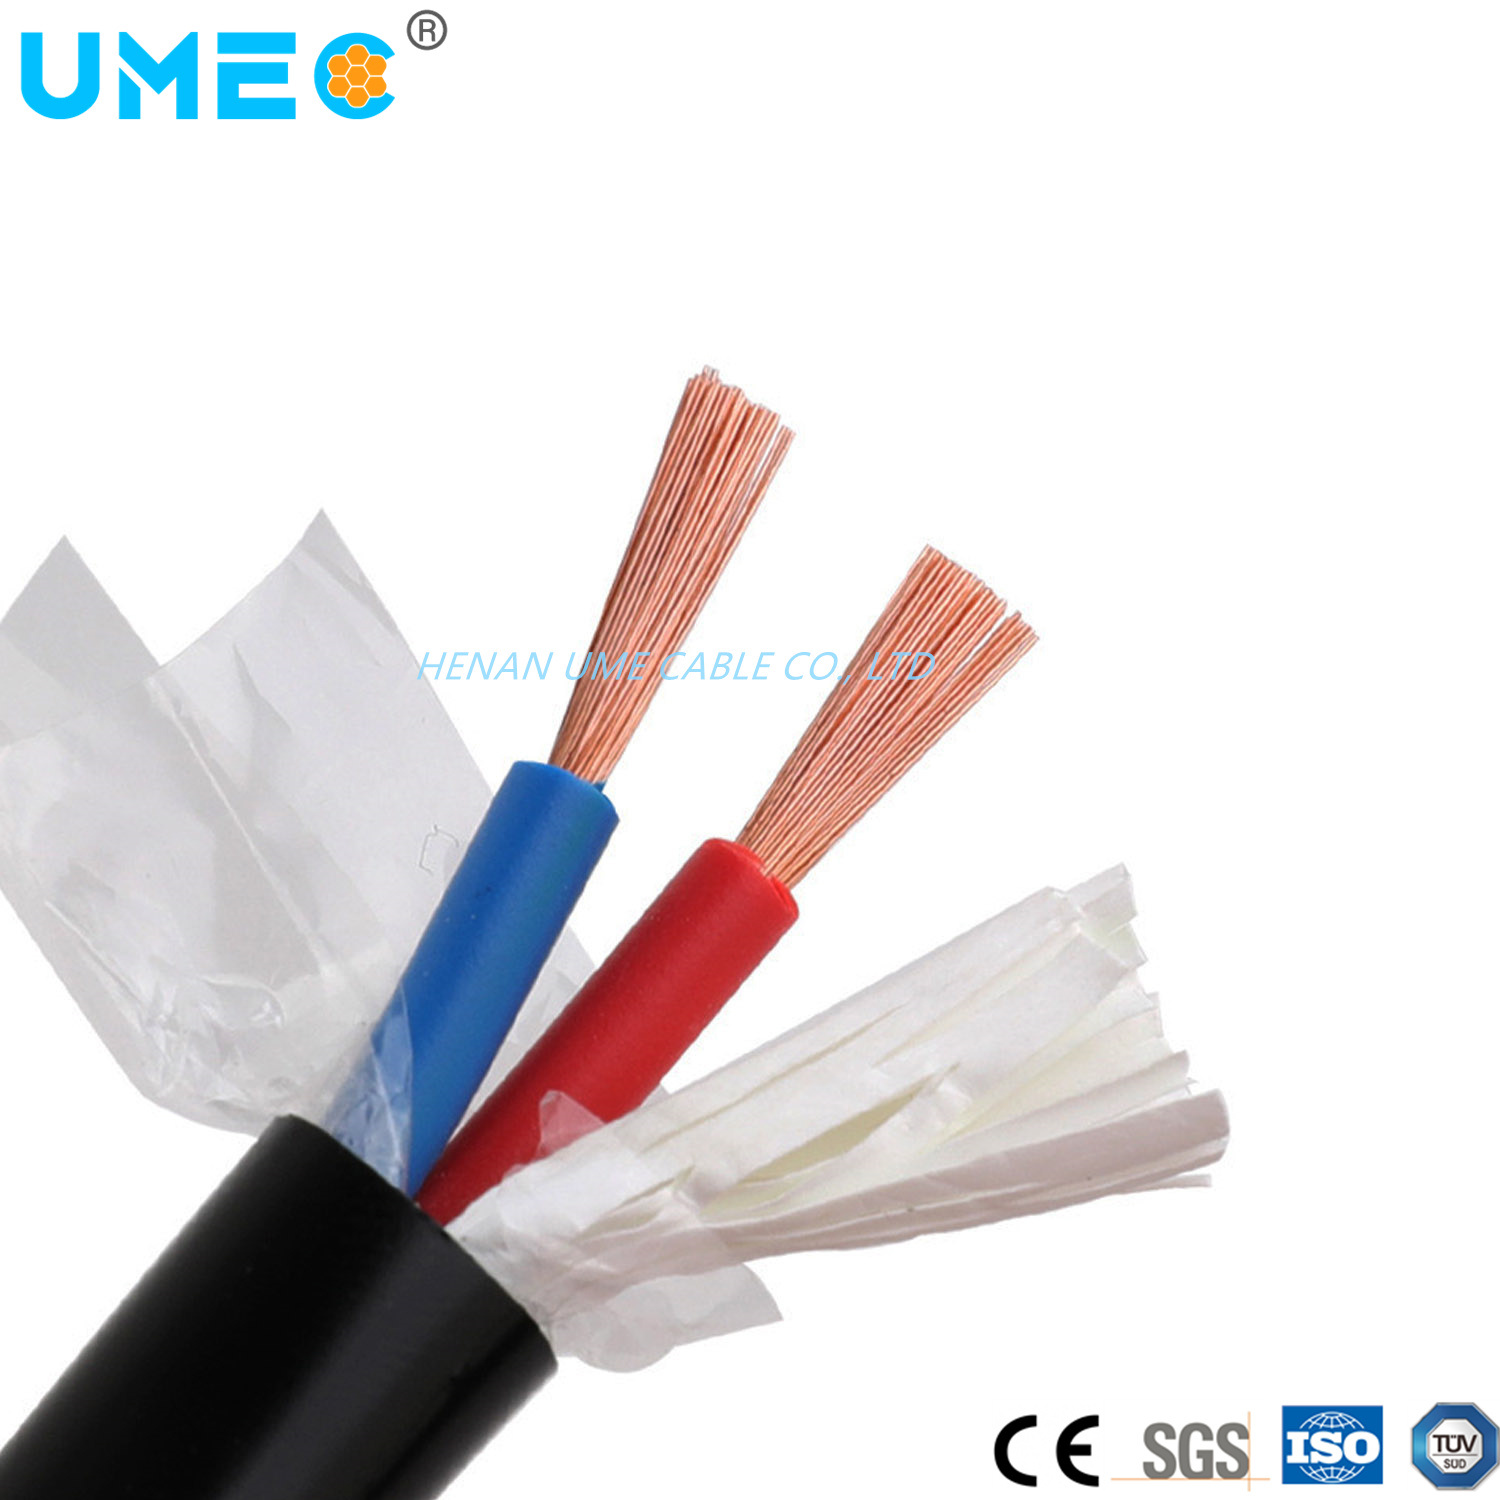 IEC60227 Rvv High Quality Multi-Core 2 3 4 Cores Copper Wires H05VV-F Myym Flexible Electrical Cable